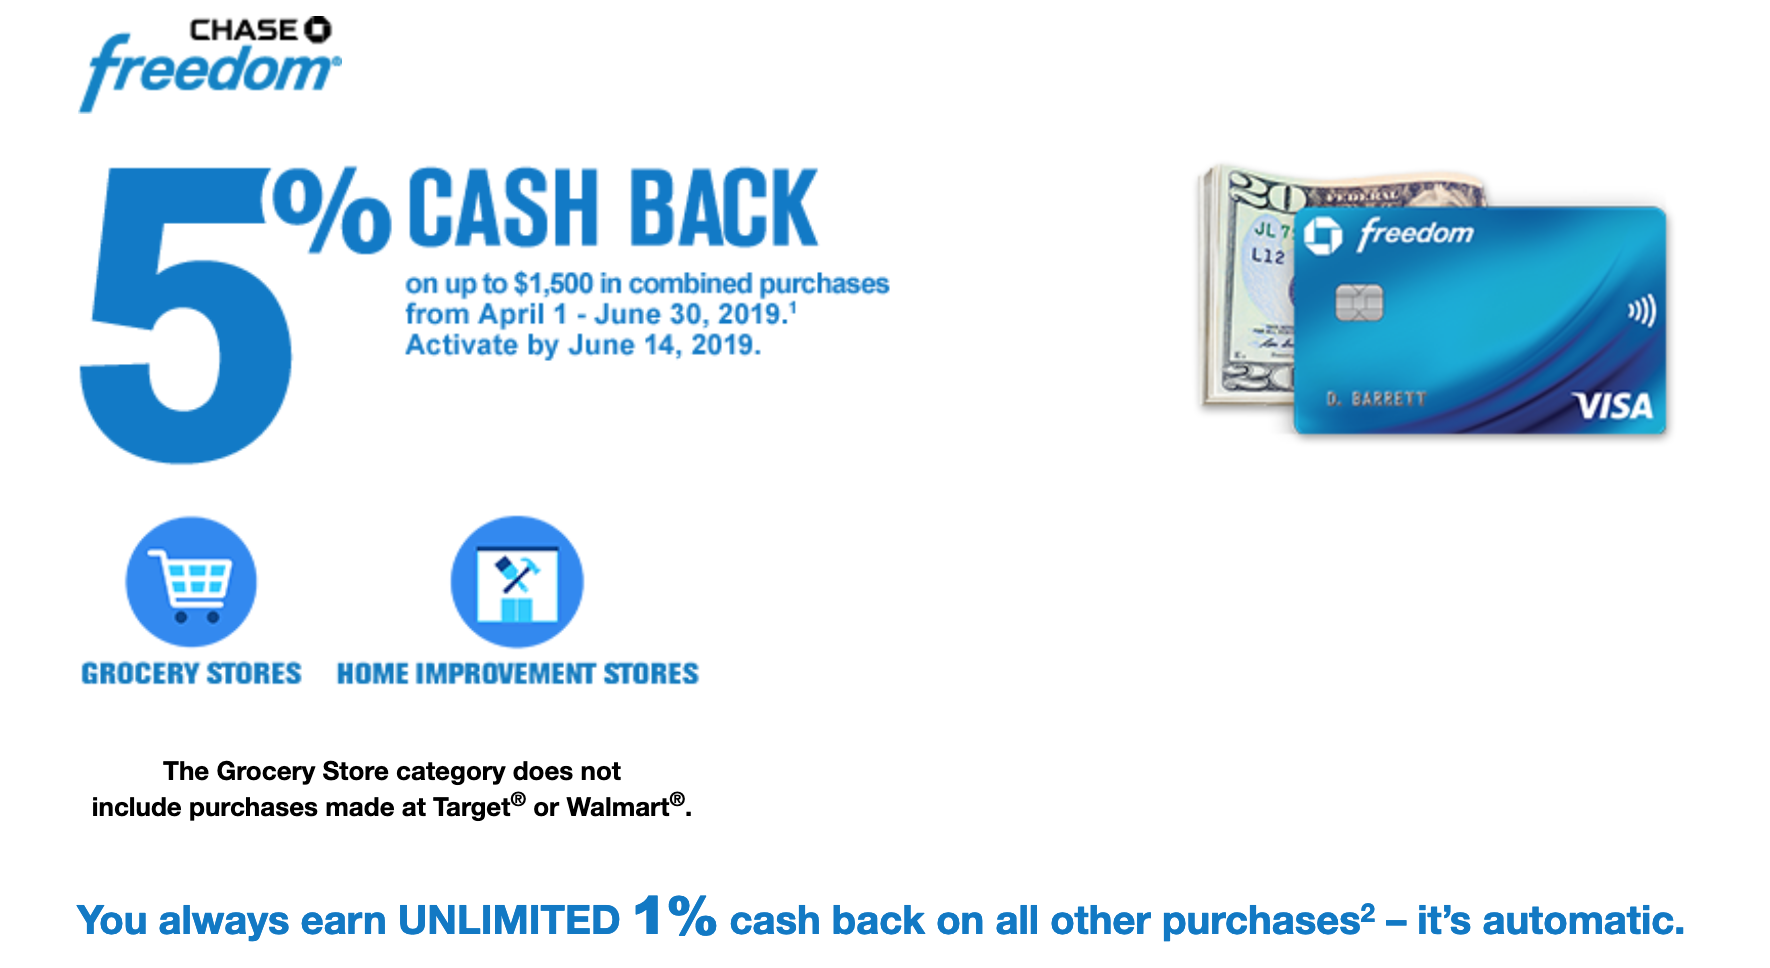 a credit card and cash back